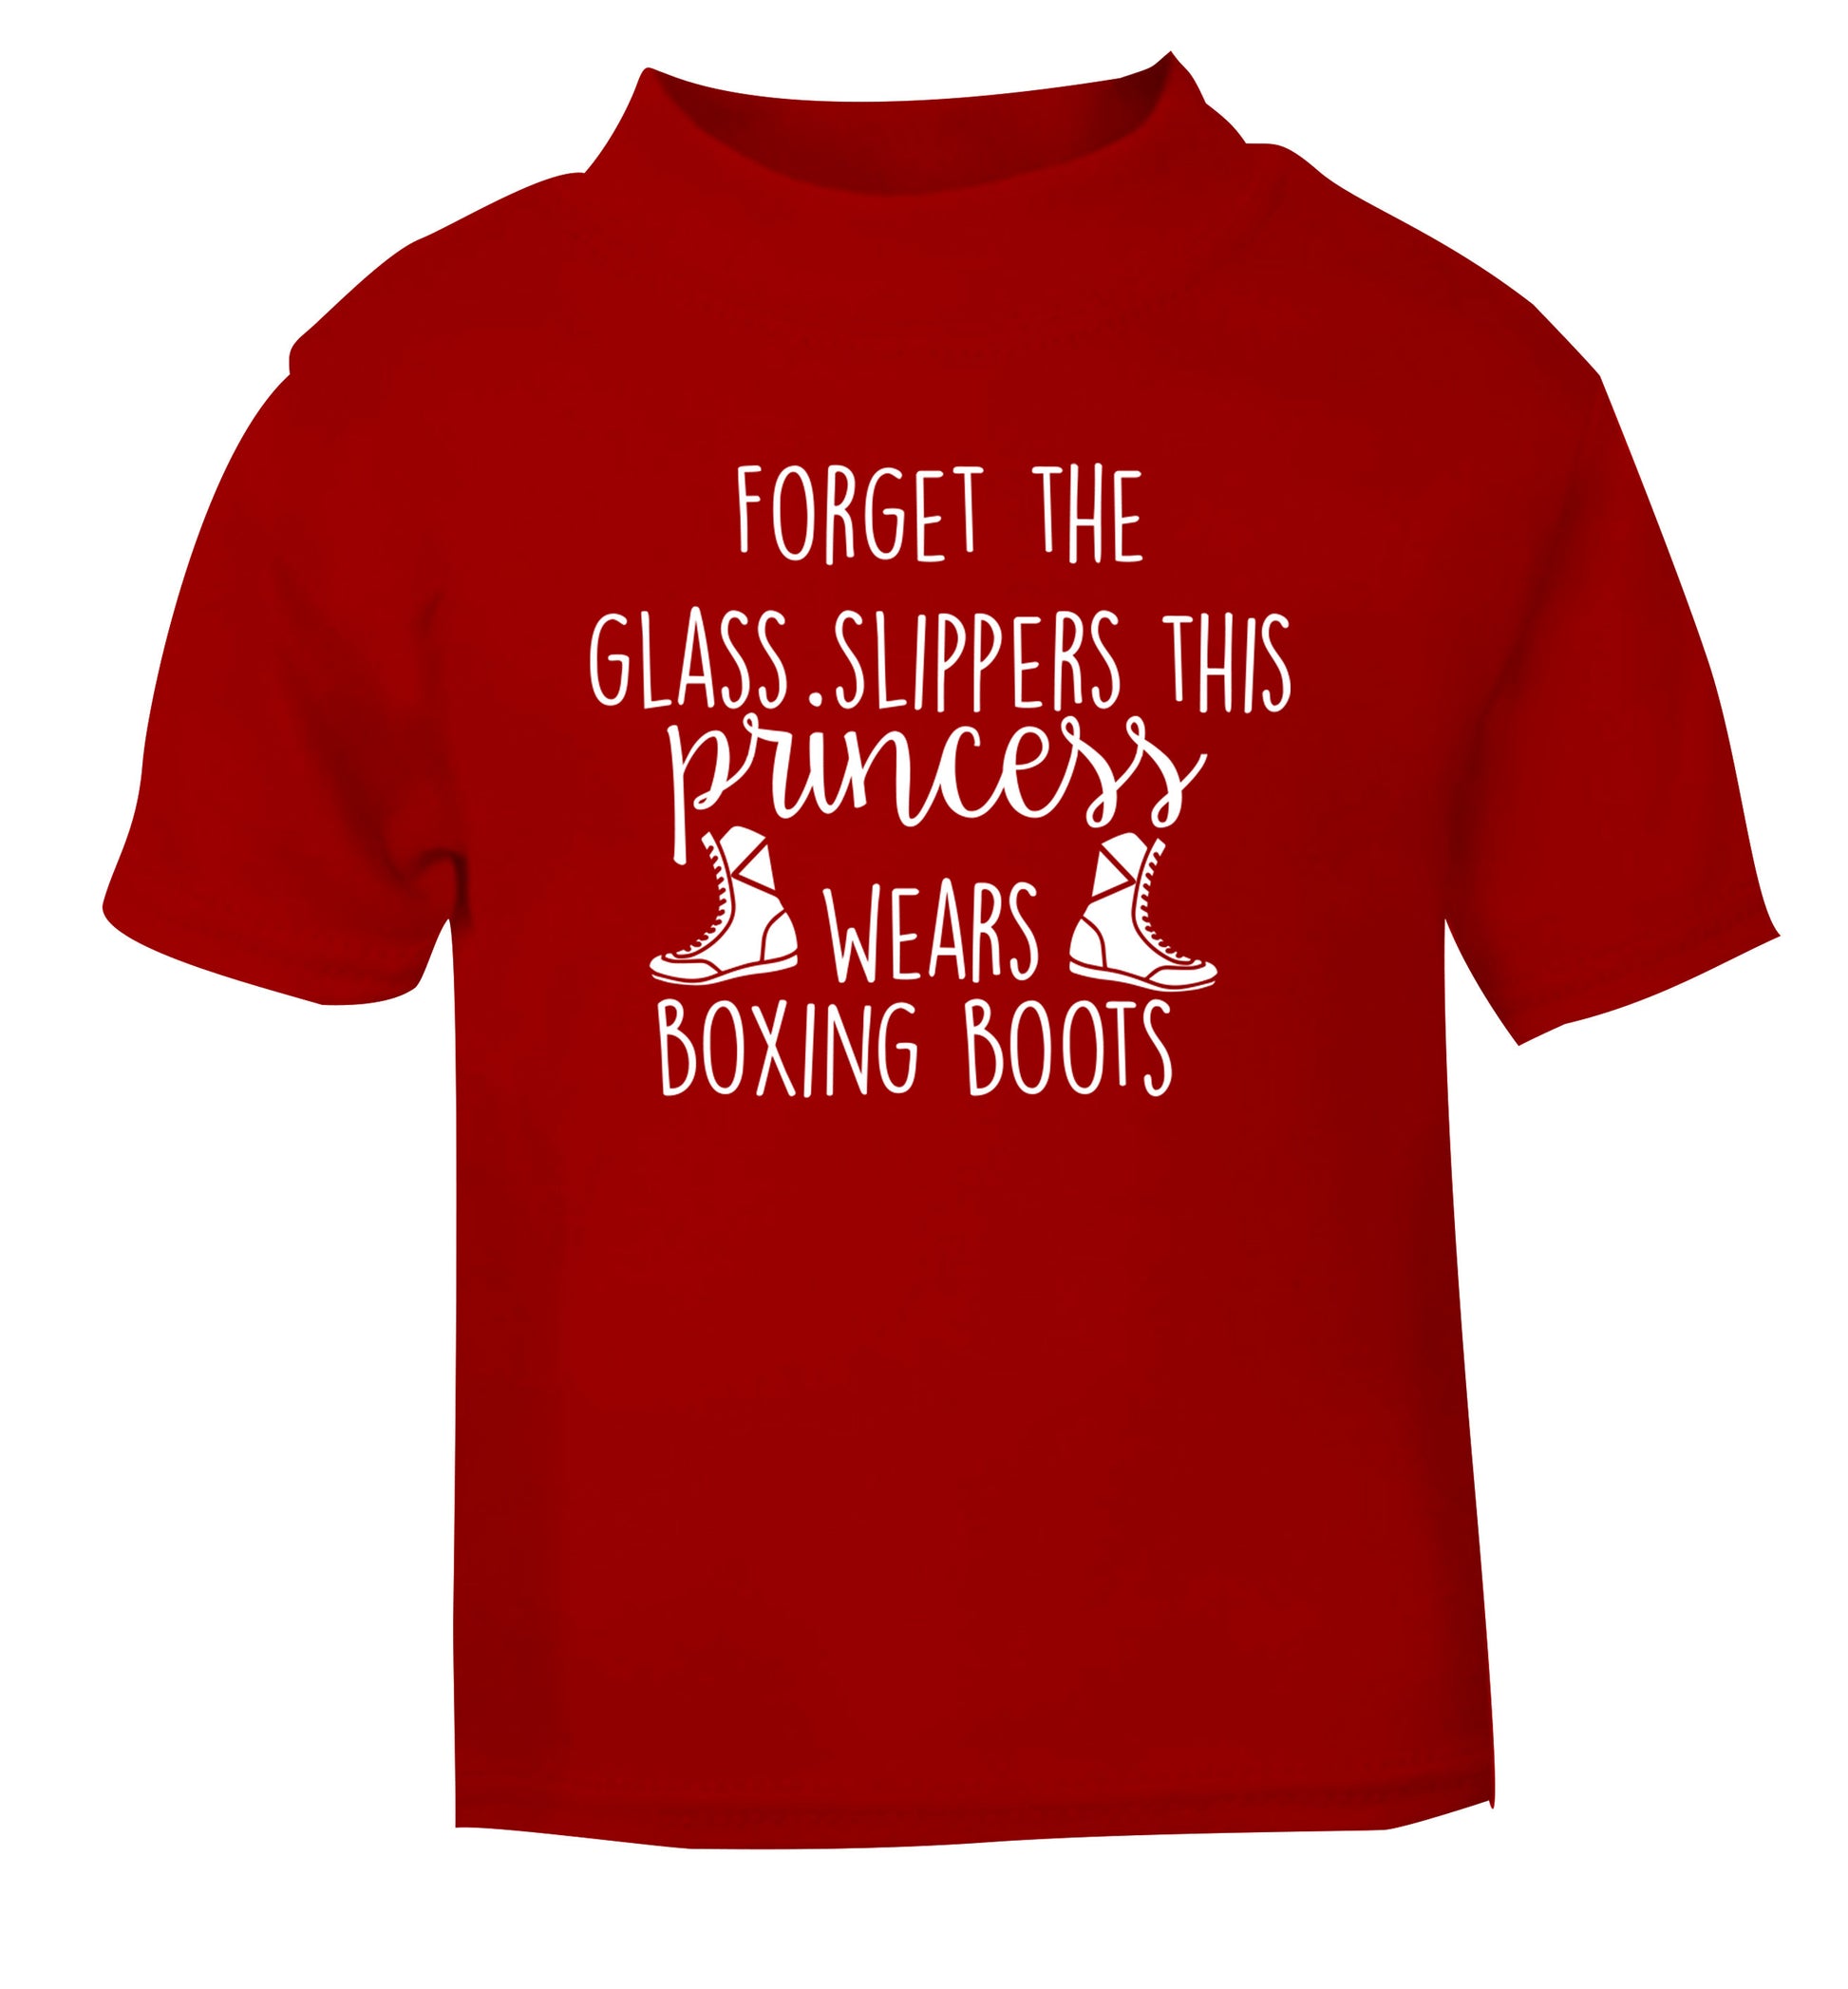 Forget the glass slippers this princess wears boxing boots red Baby Toddler Tshirt 2 Years